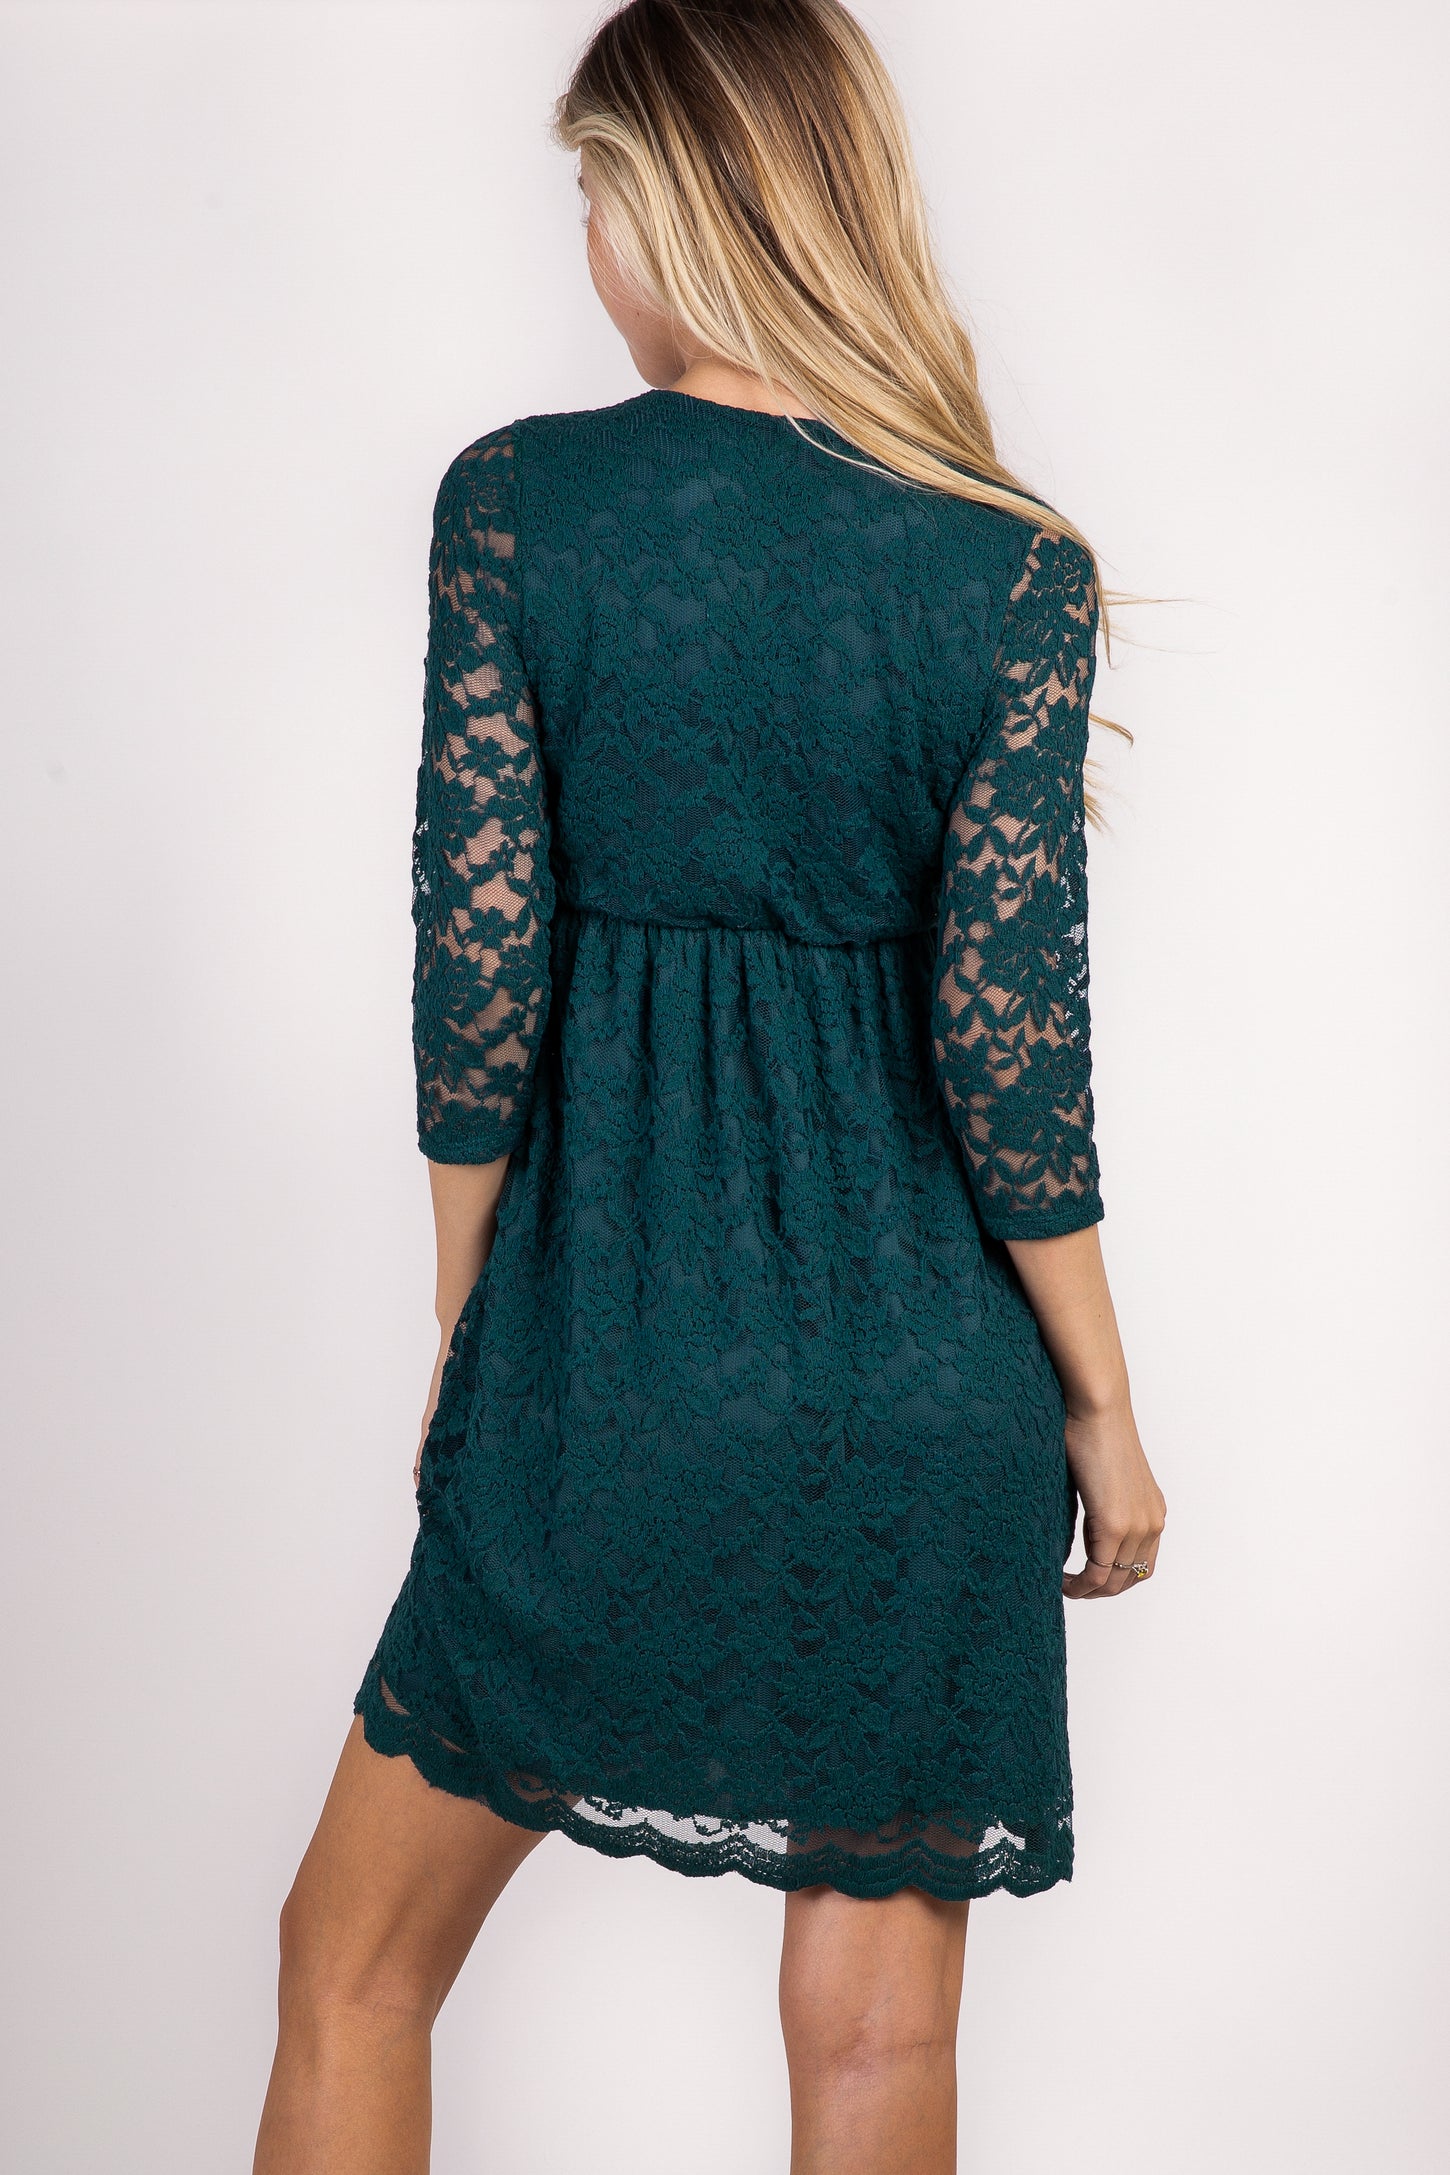 Forest Overlay Lace Wrap PinkBlush Green Dress–